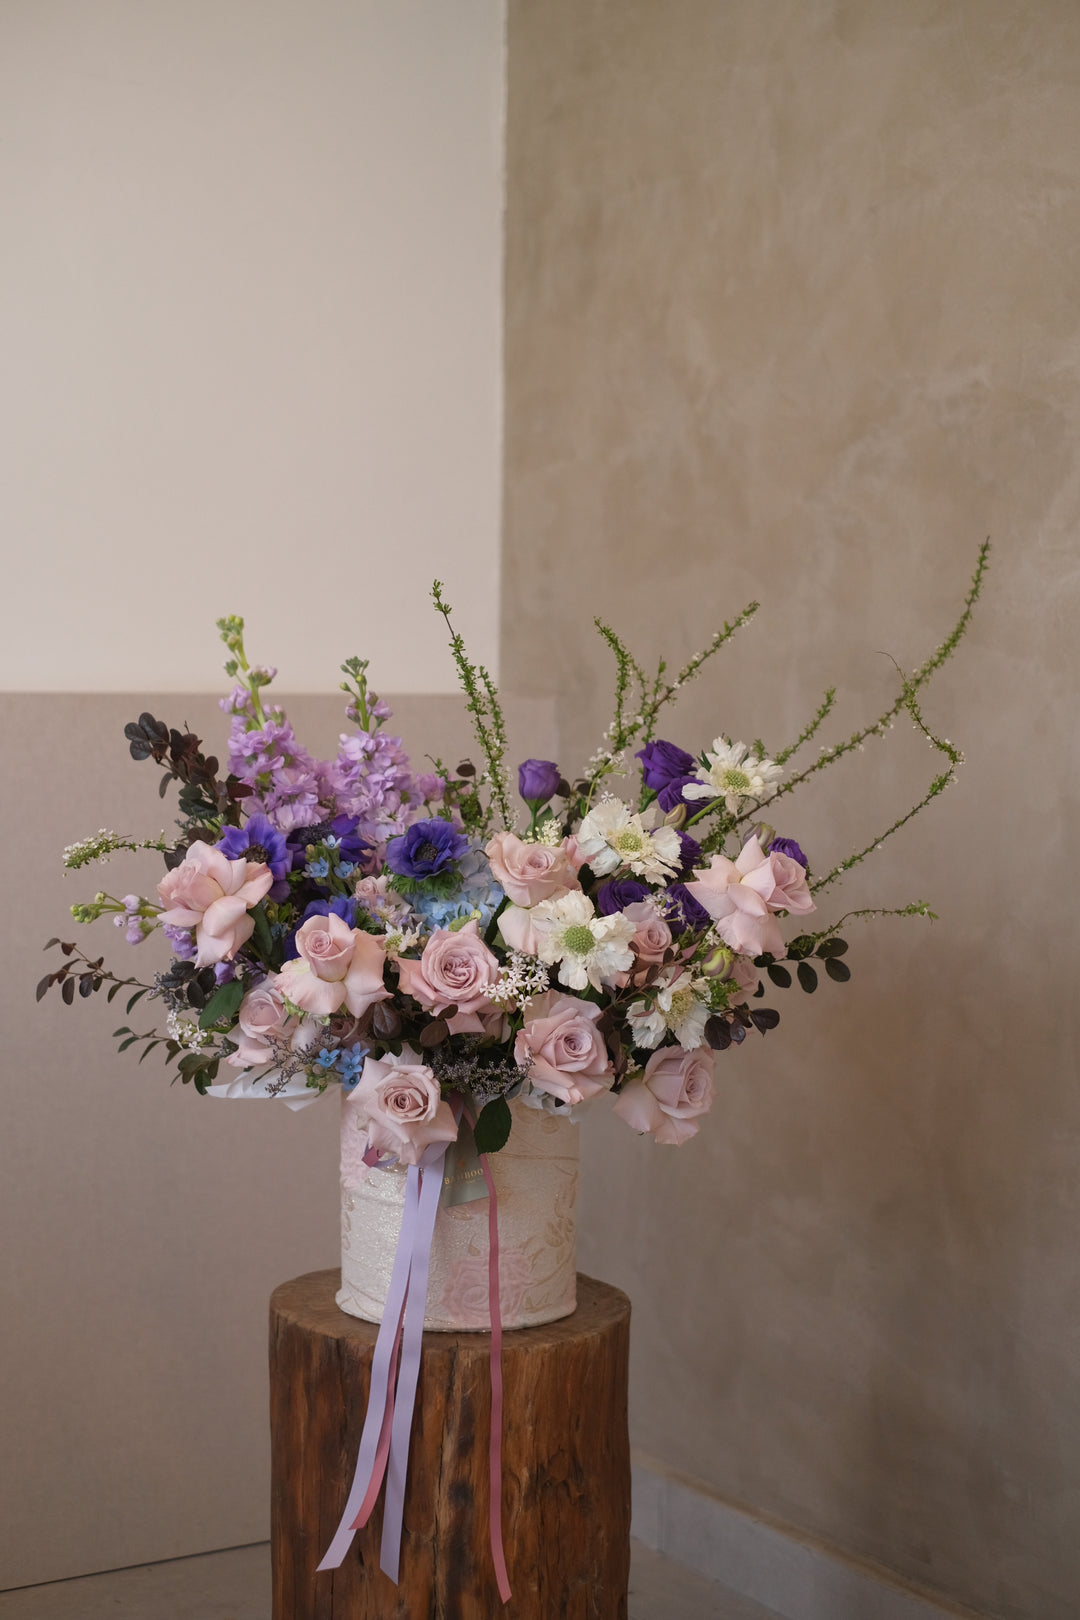  "Floral arrangement with light blue, blush pink, ivory, coral, and pale lavender blooms in embroided box by Bamboo Green Florist"